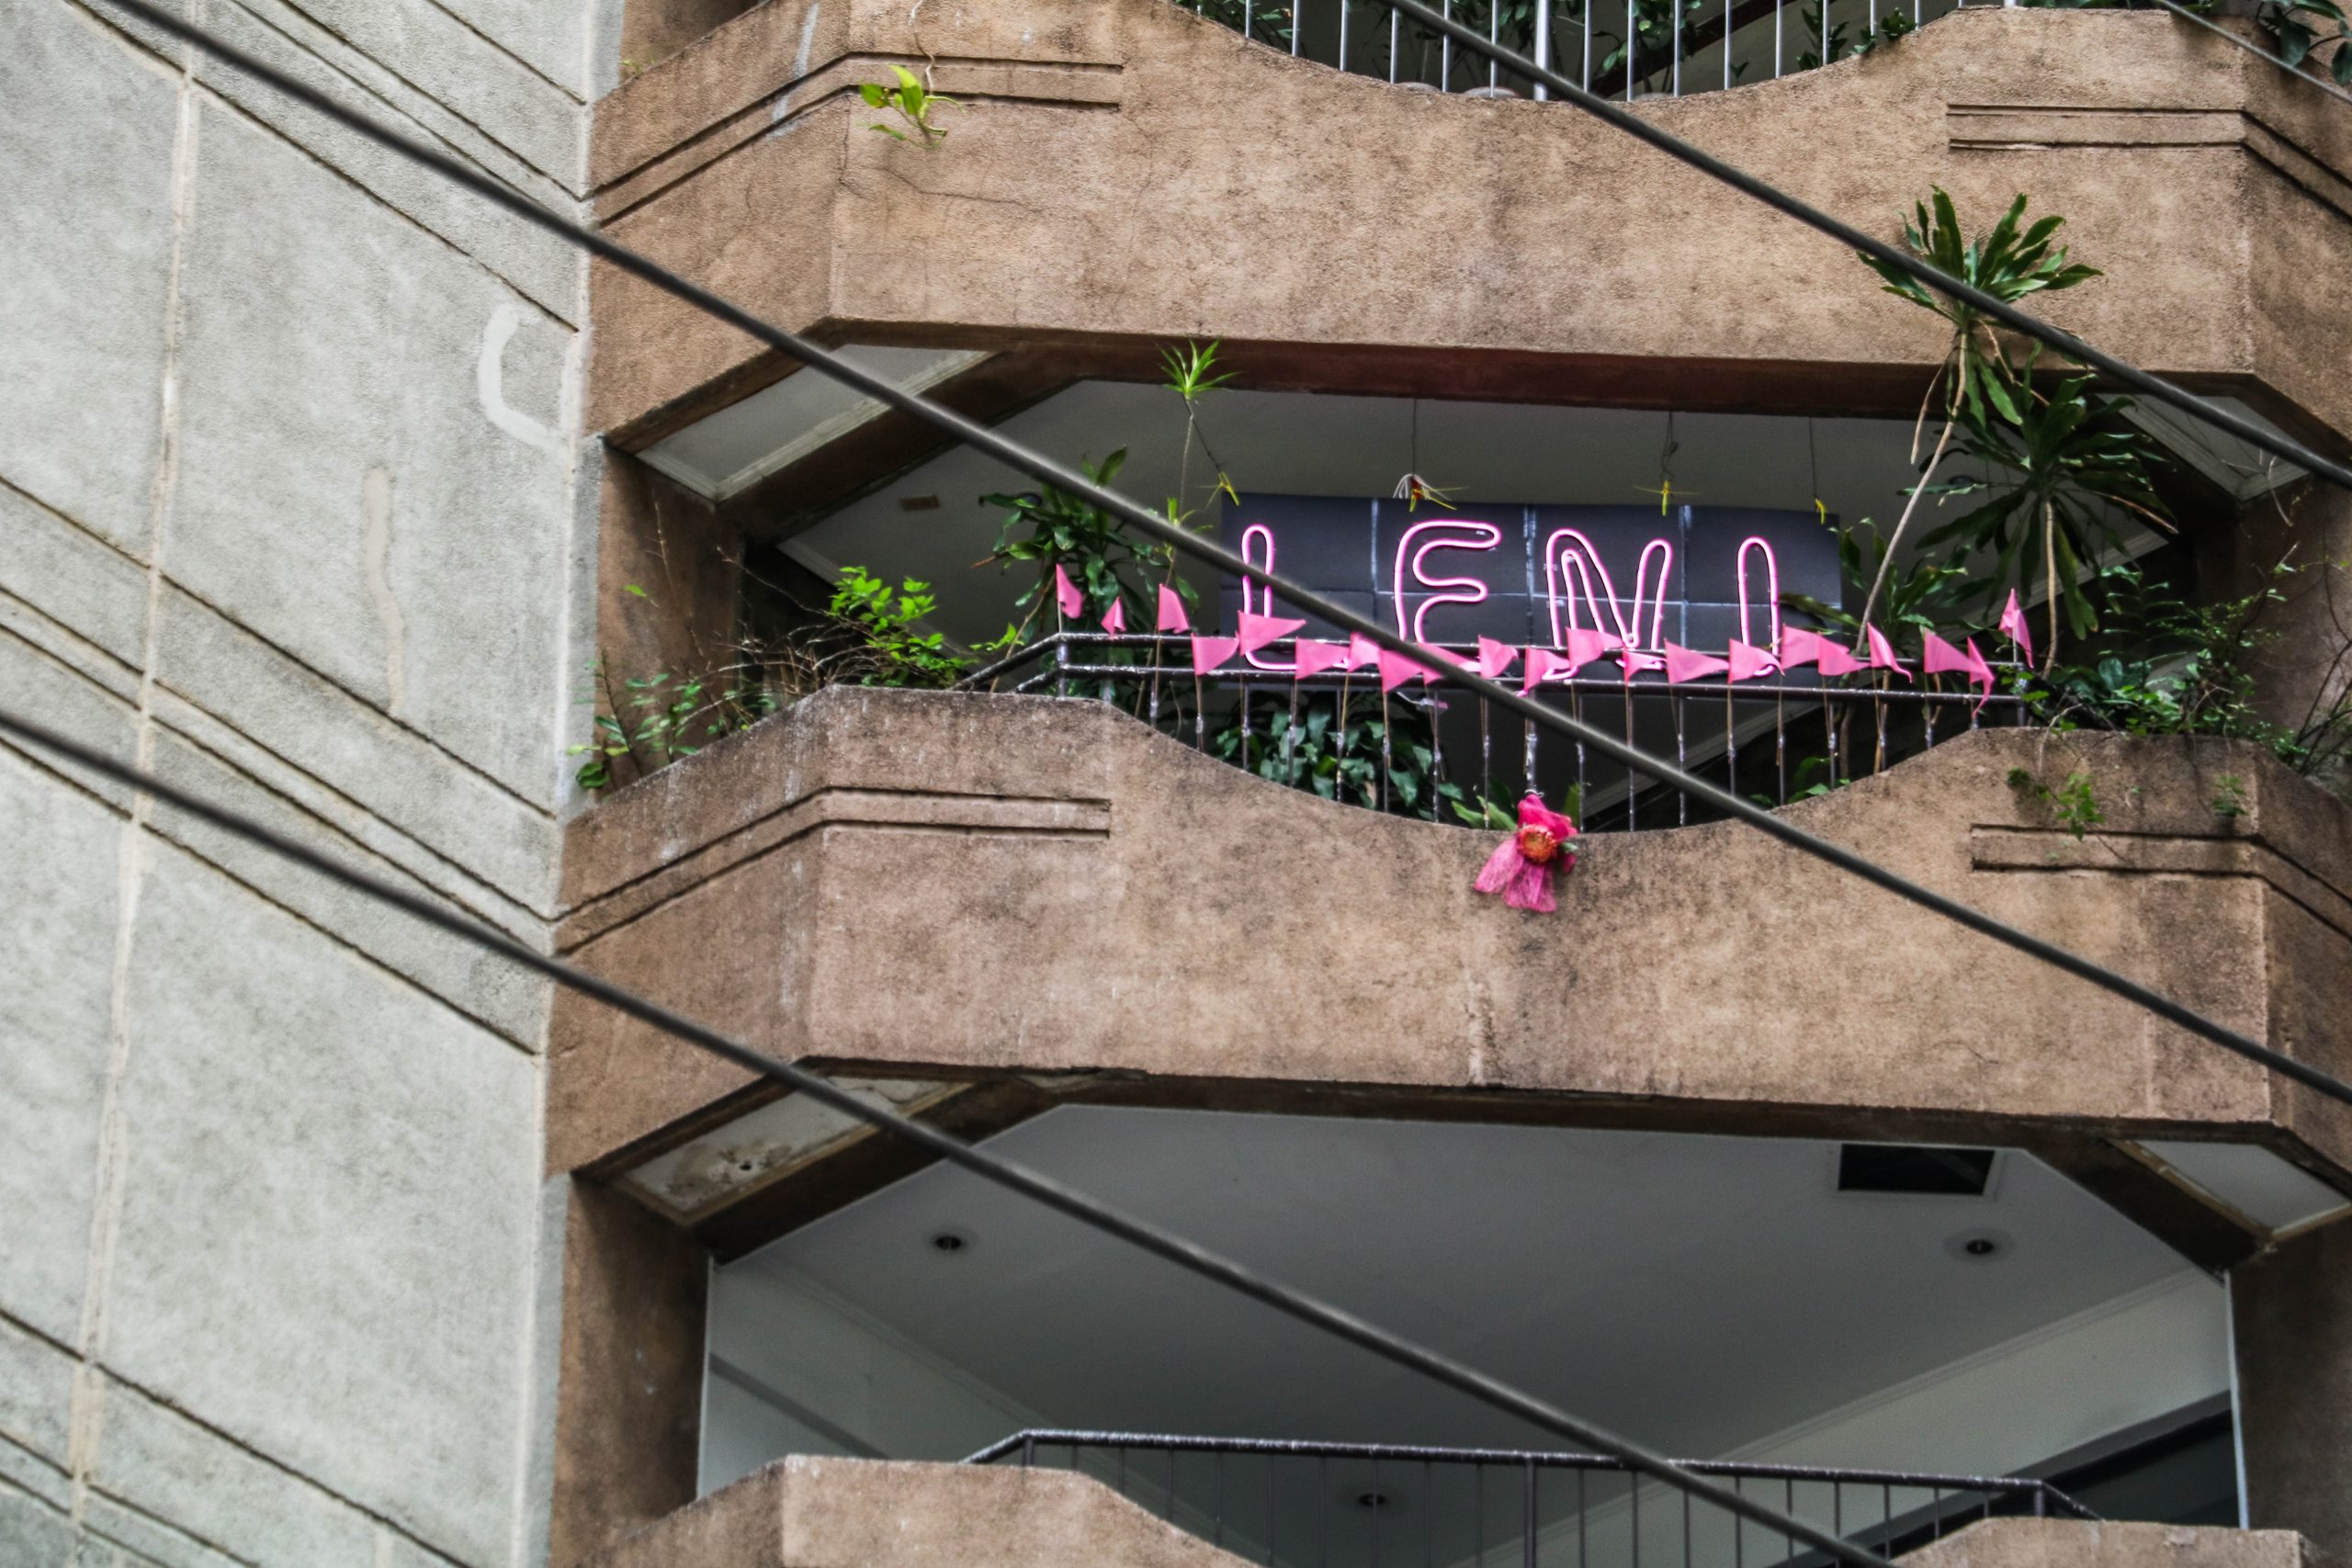 Residents of a Pasig residential tower display signs for Leni. At night, some of the signs light up in pink, the candidate’s campaign colors.